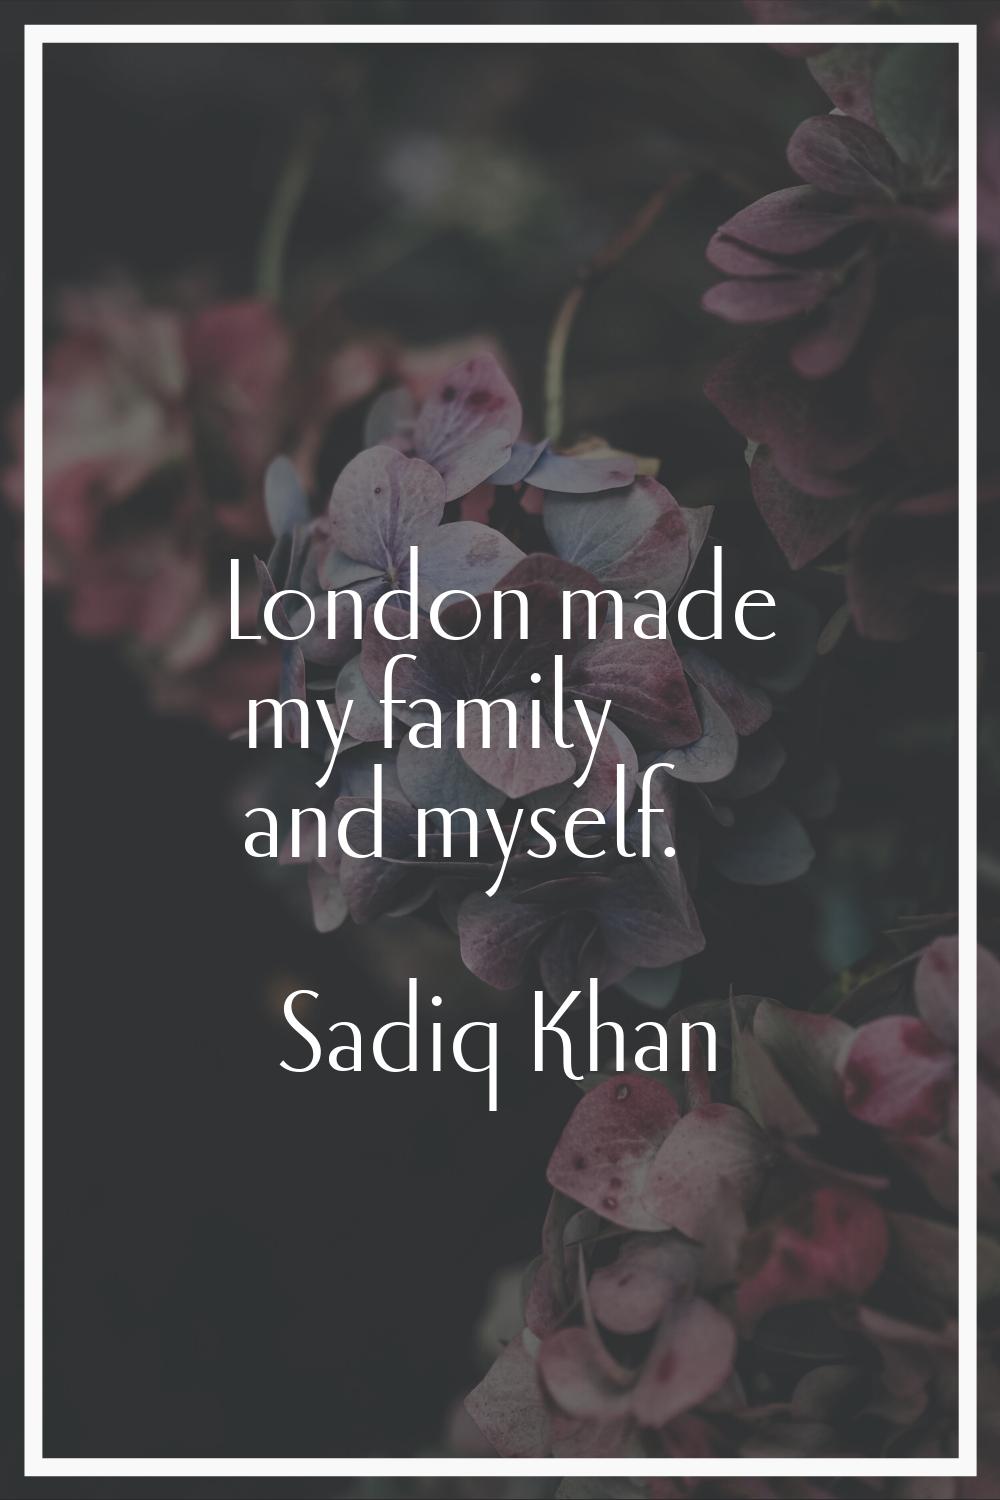 London made my family and myself.